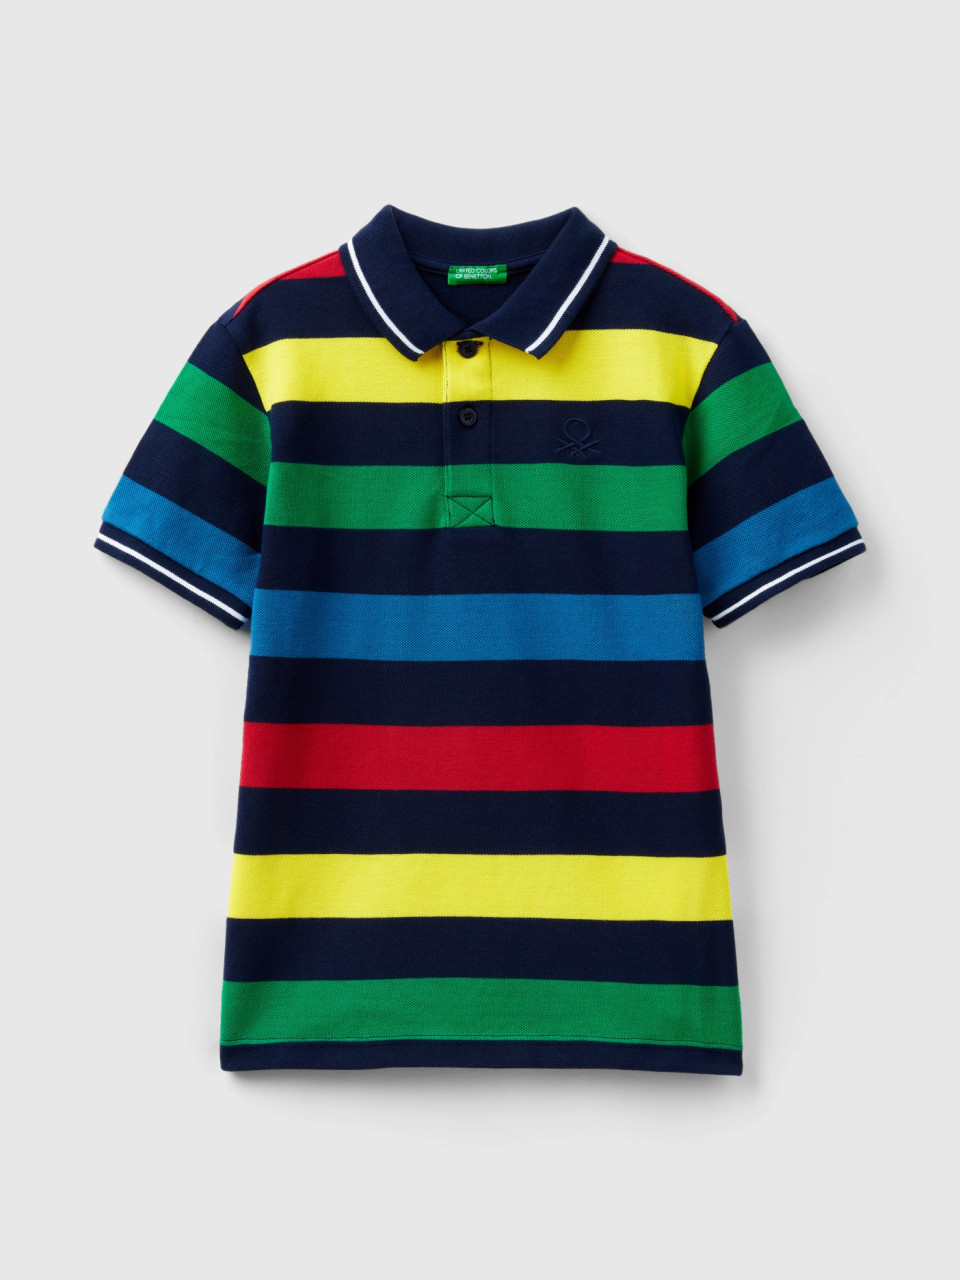 Benetton, Short Sleeve Polo With Stripes, Multi-color, Kids